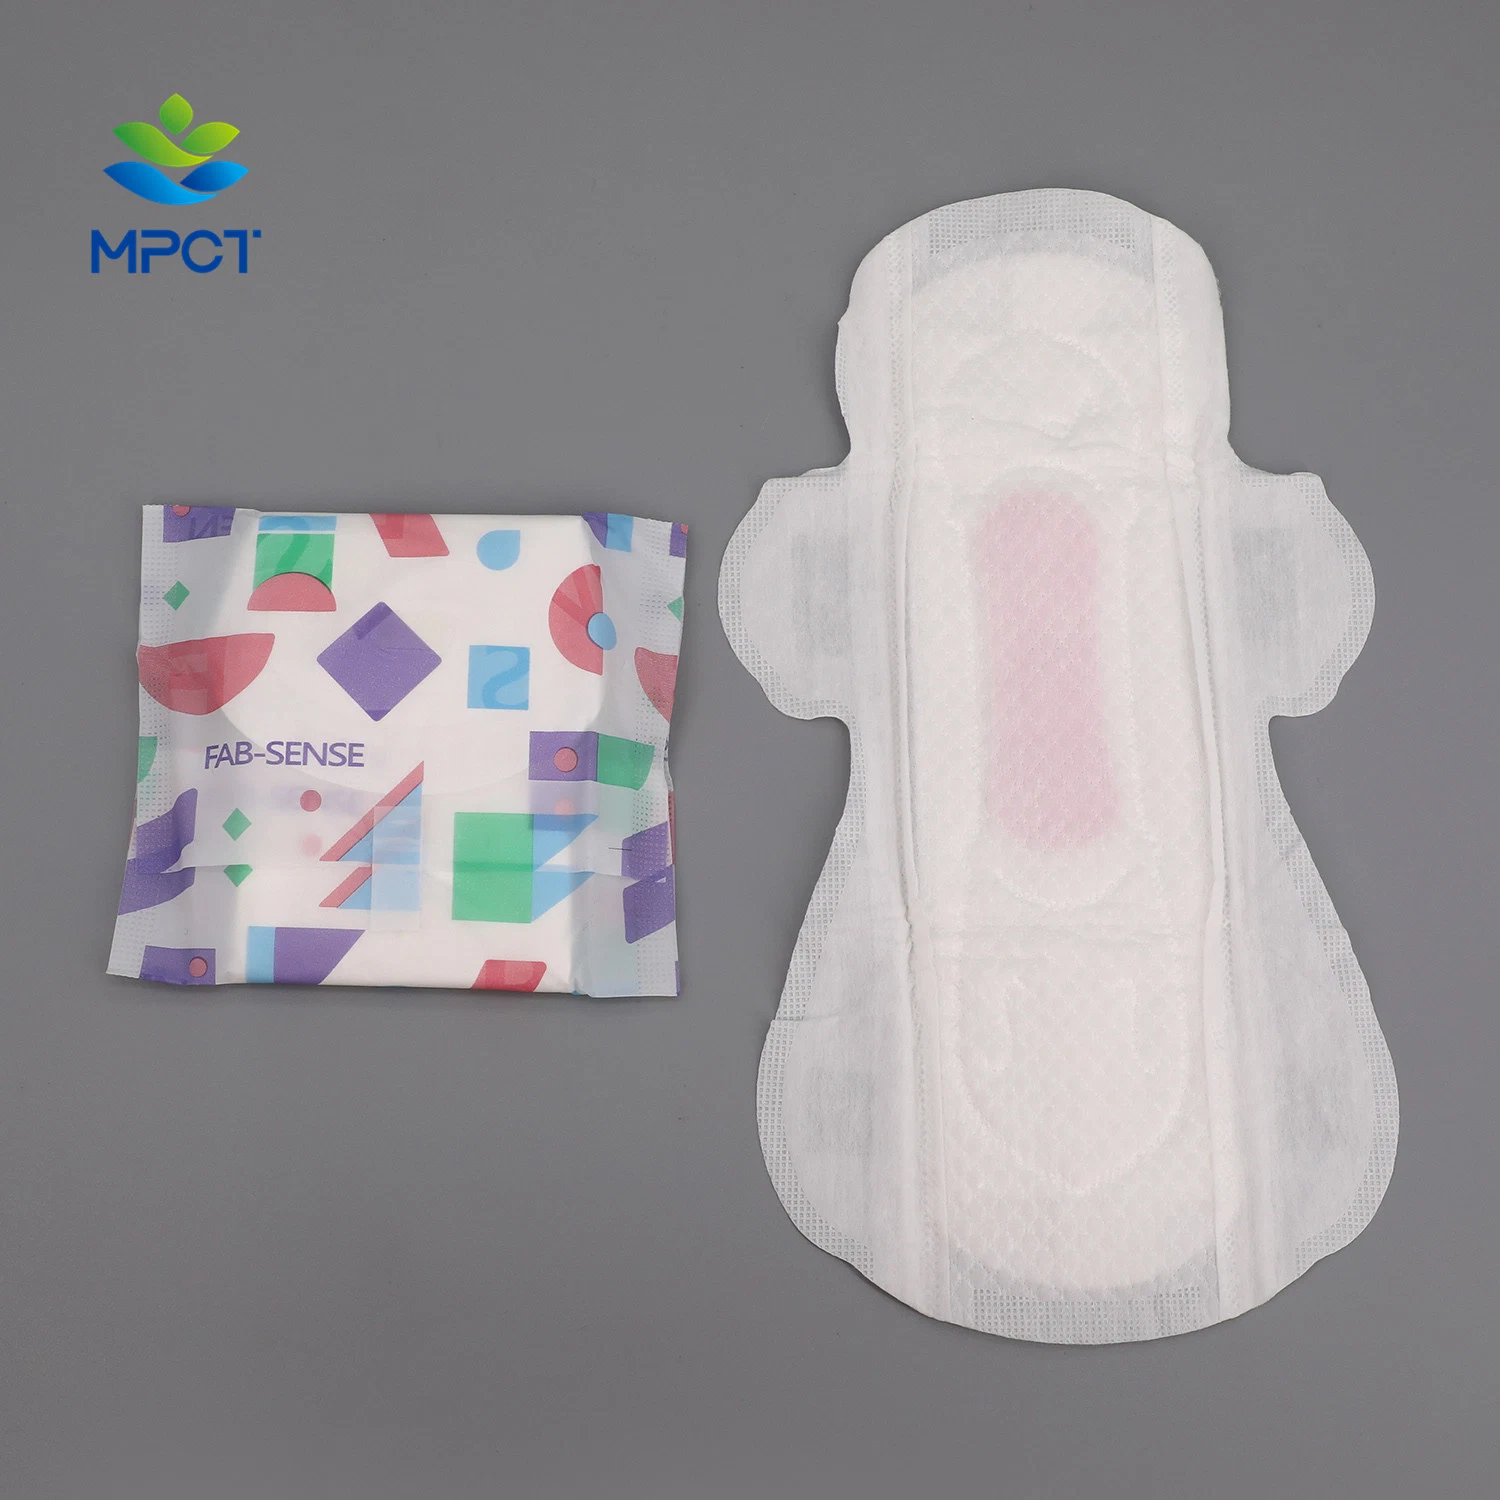 Antibacterial Sanitary Napkins with Independent Absorber Provided Extra Absorbency